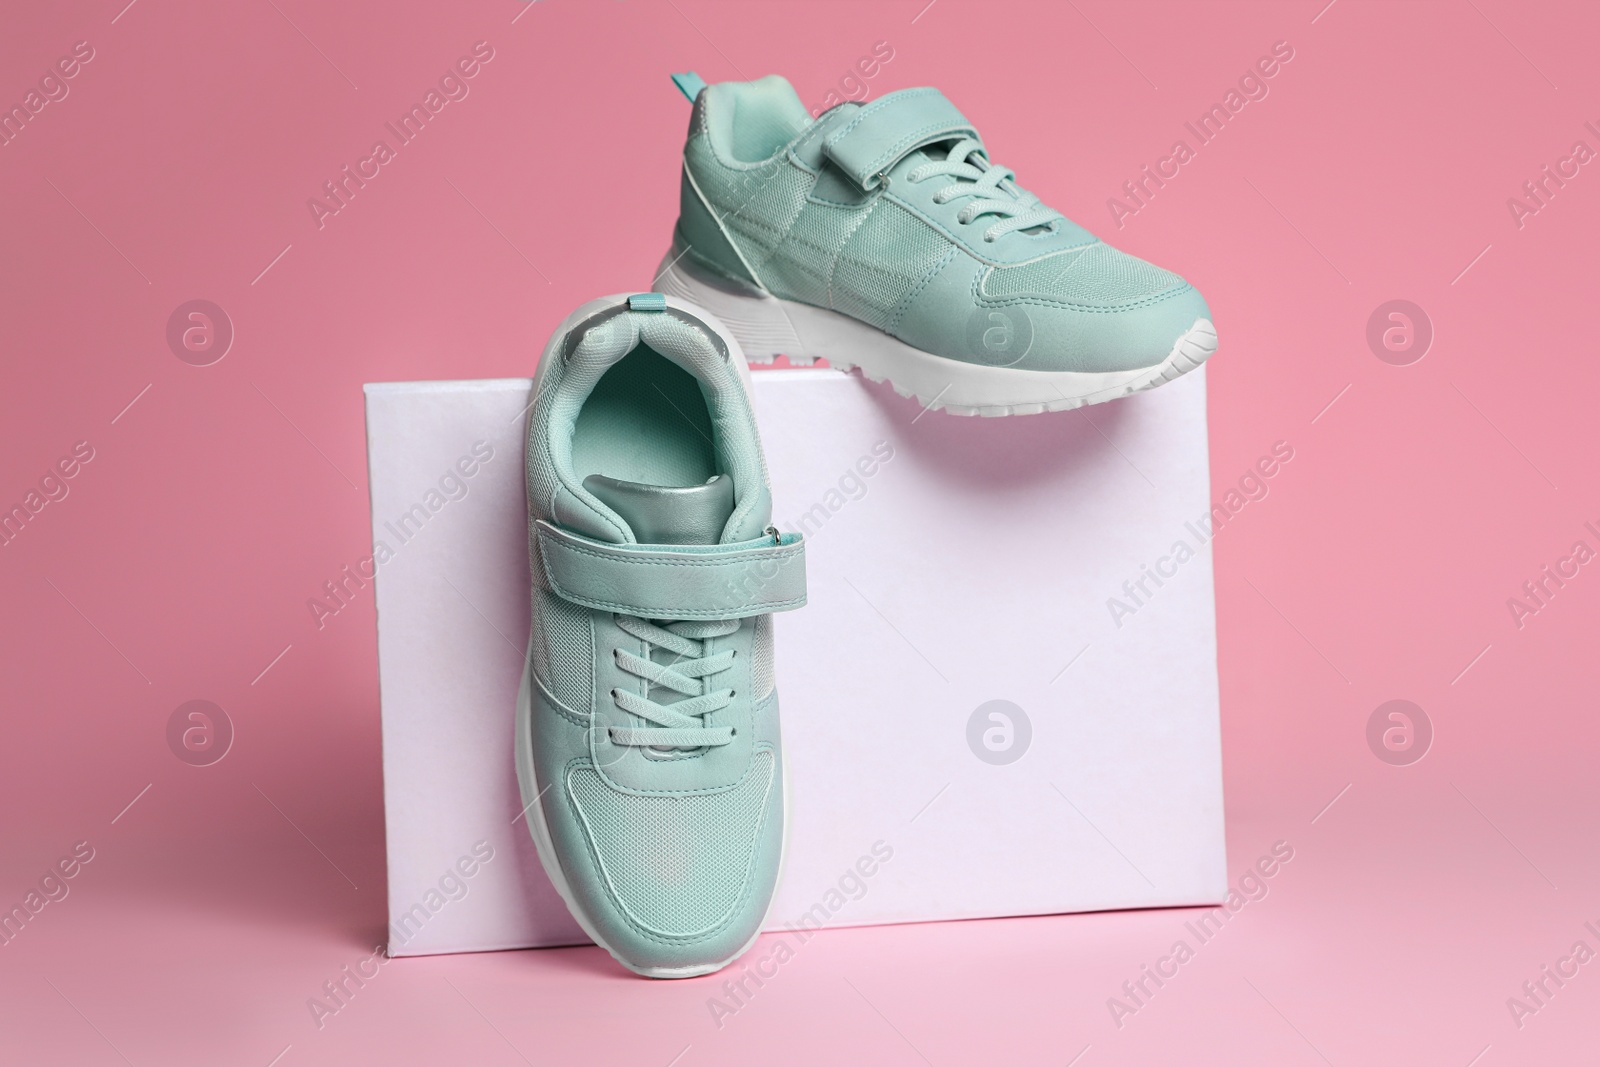 Photo of Pair of stylish sneakers and box on pink background